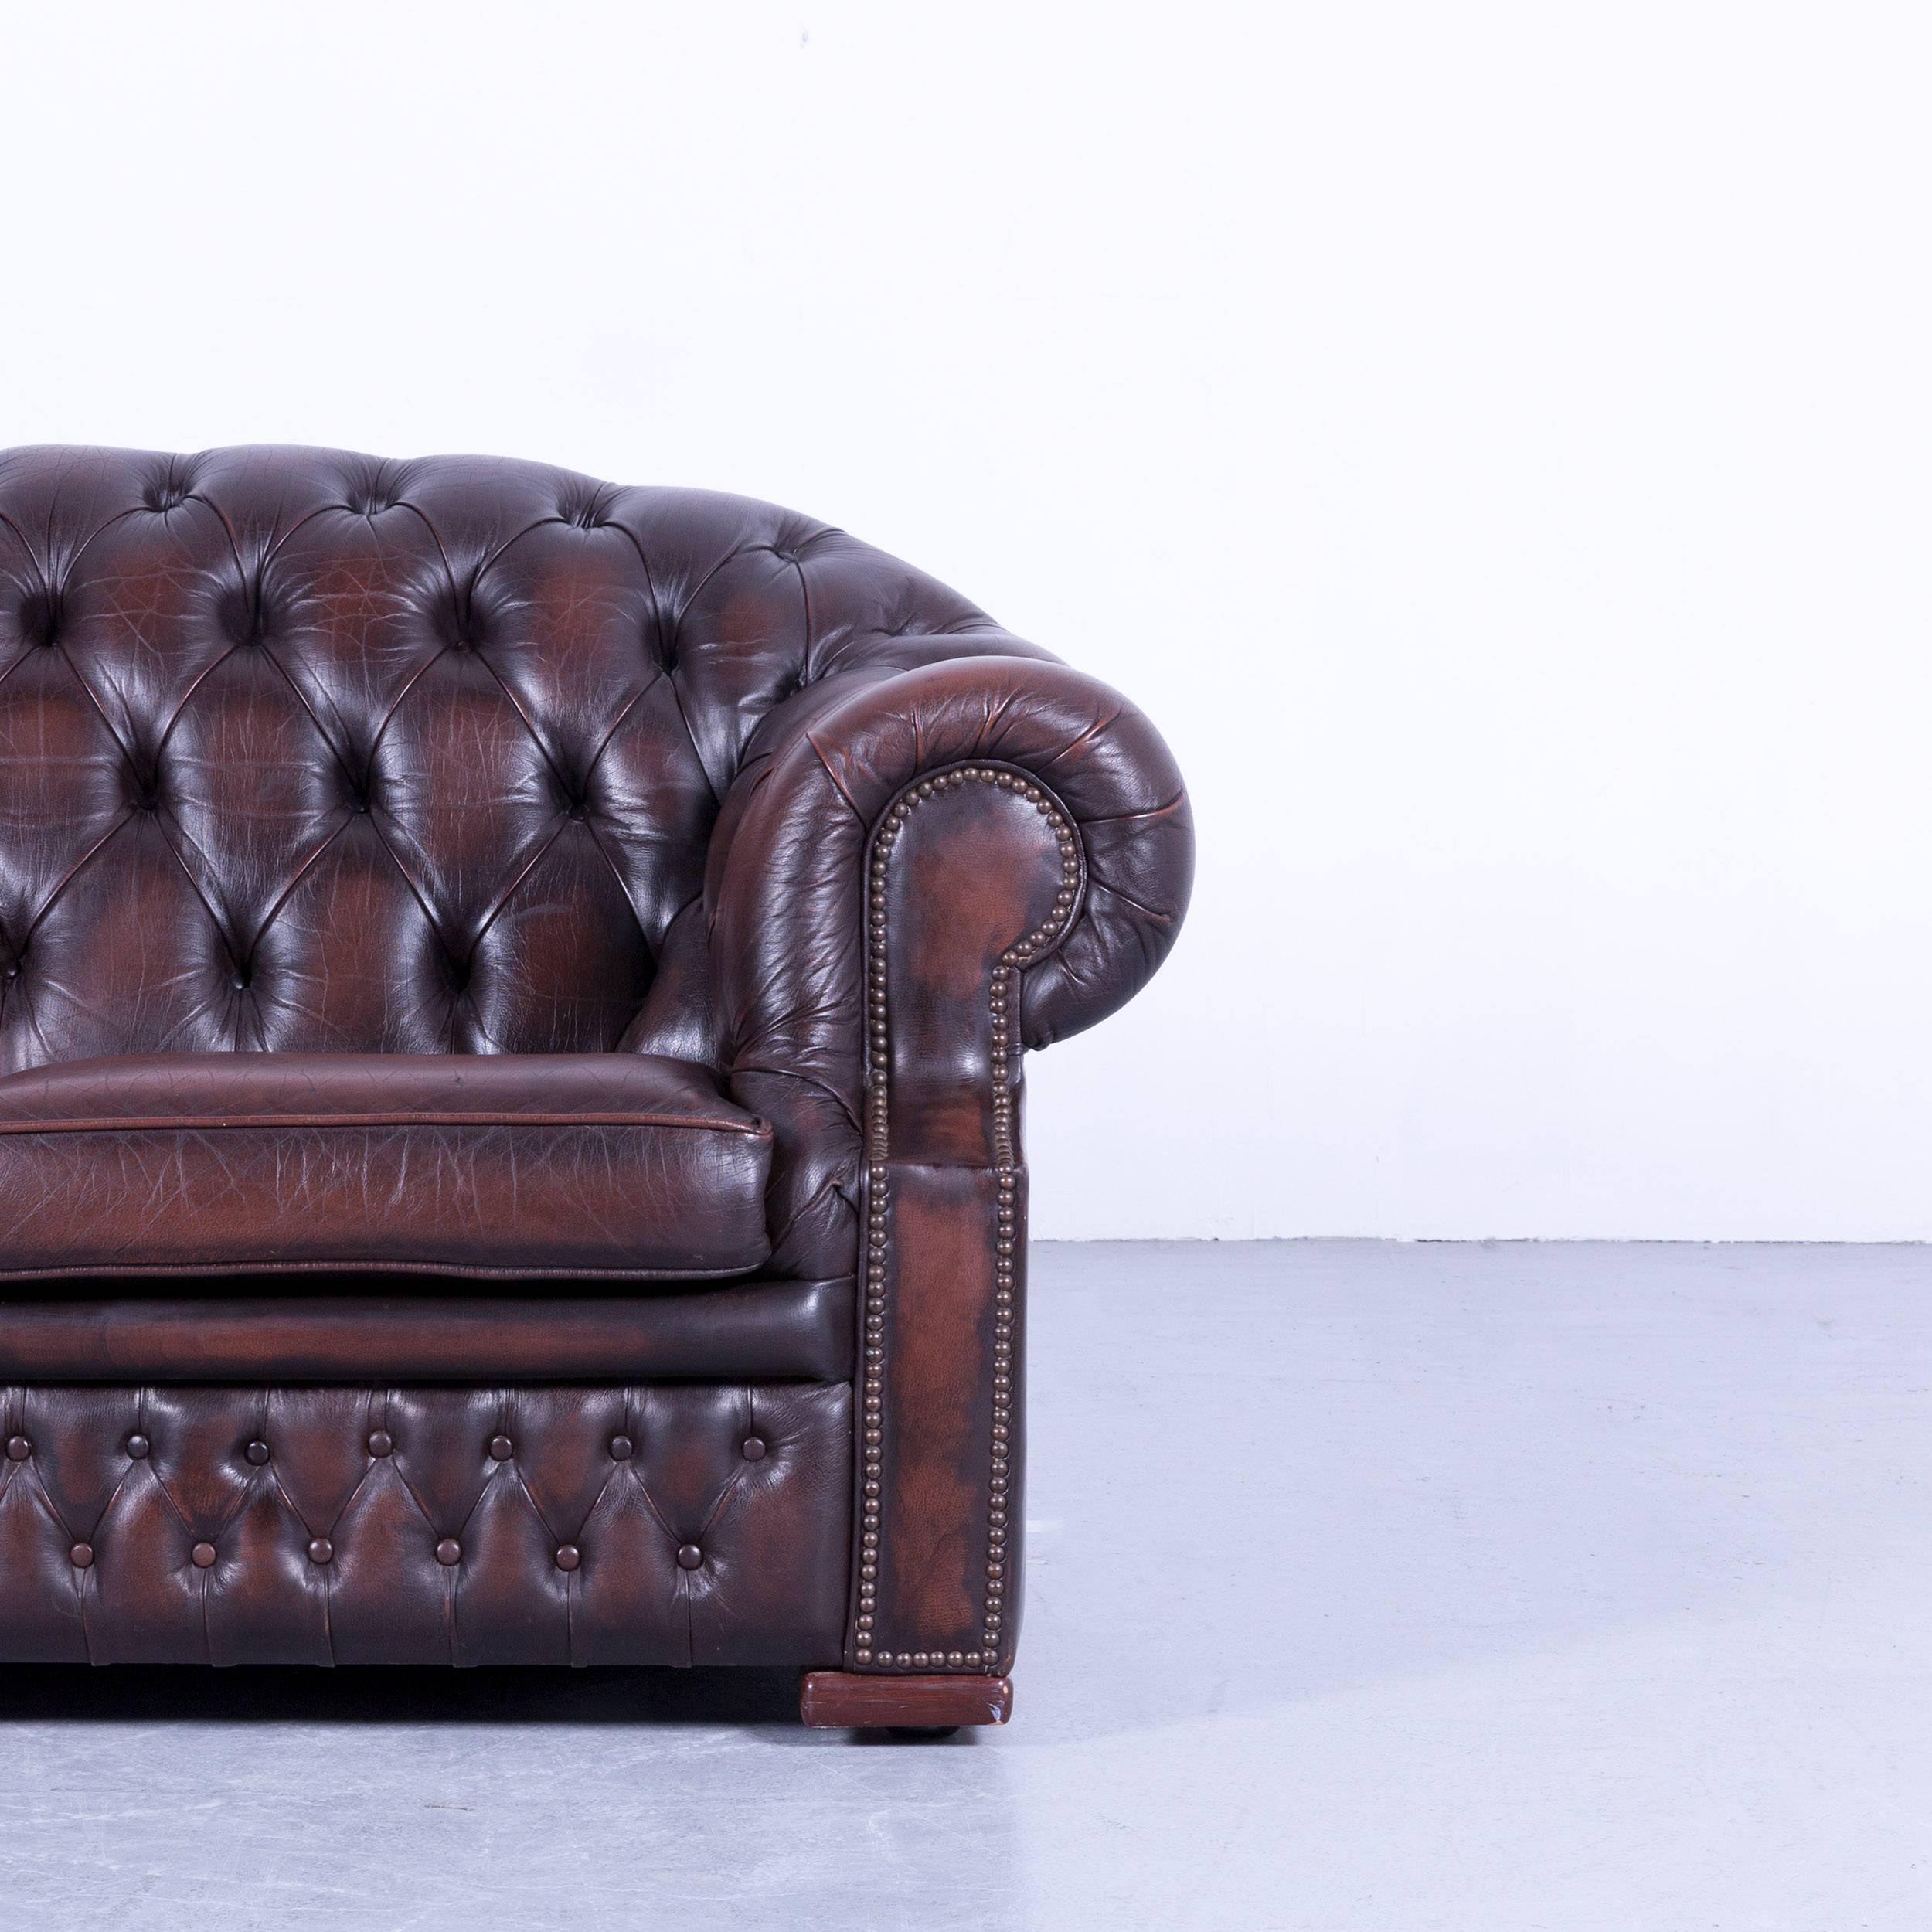 Centurion Chesterfield sofa brown mocca two-seat vintage retro couch, made for pure comfort and elegance.